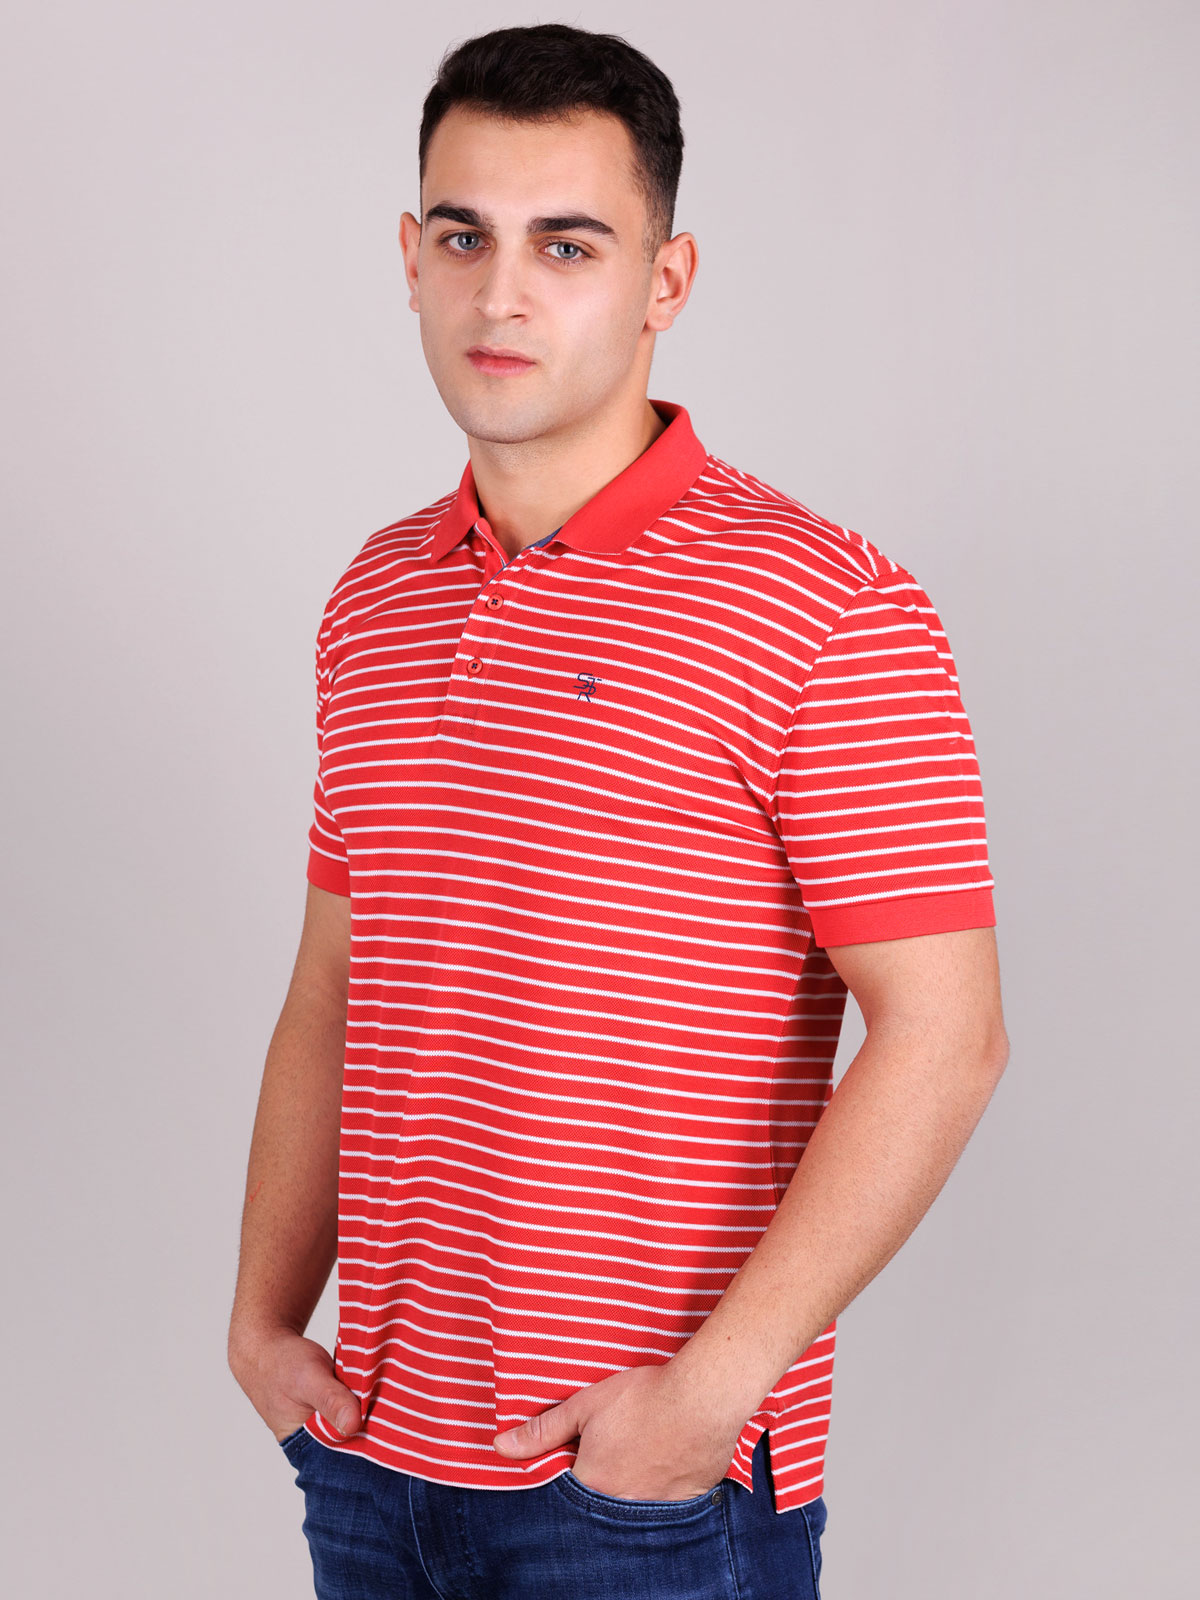 Tshirt in coral with white stripe - 93417 € 38.24 img2